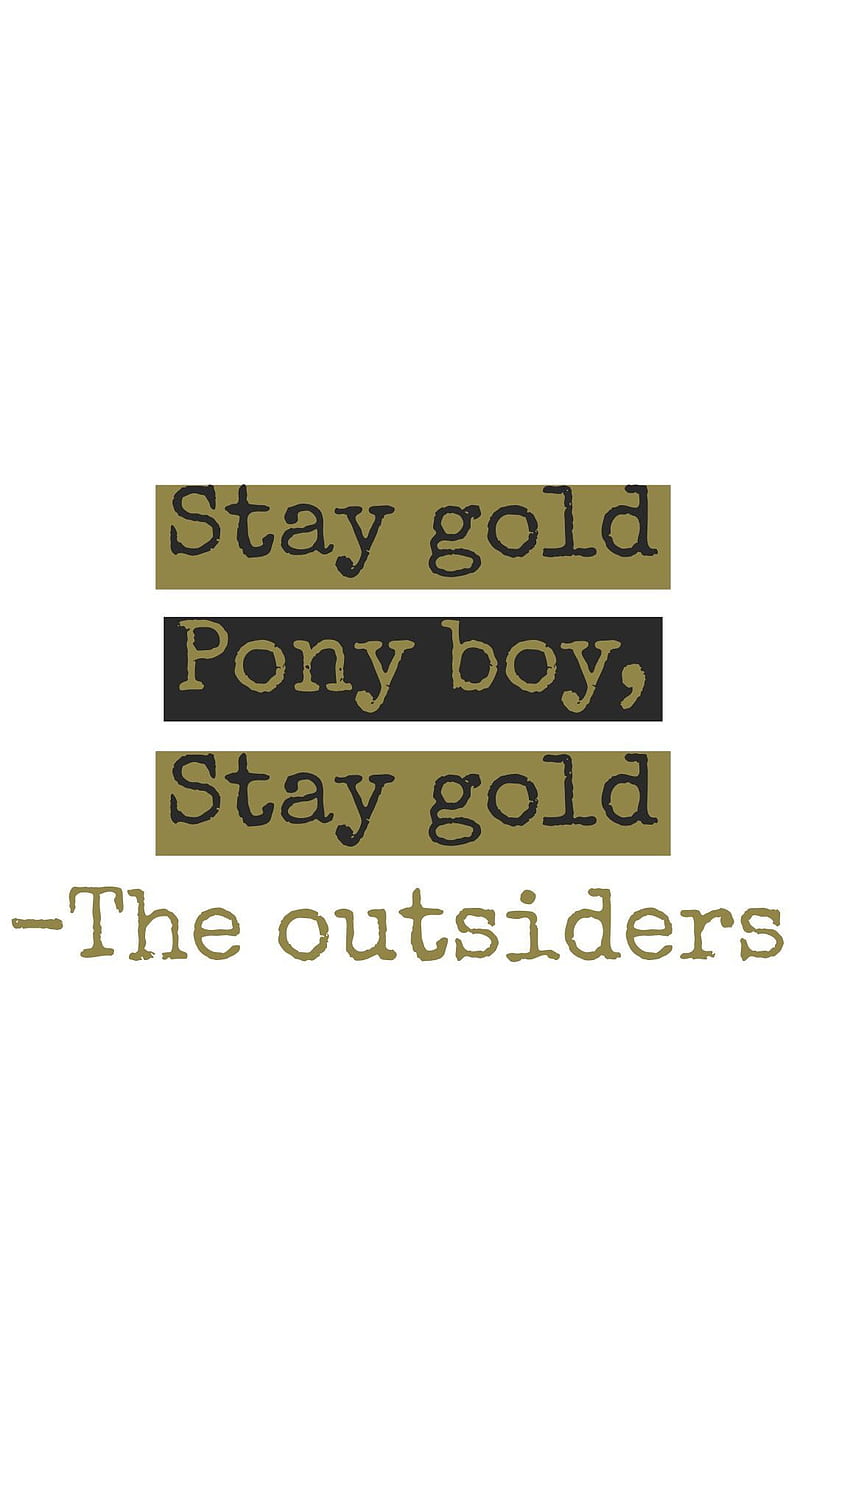 Stay gold ponyboy. Stay gold ponyboy quote, The outsiders, Stay gold HD phone wallpaper